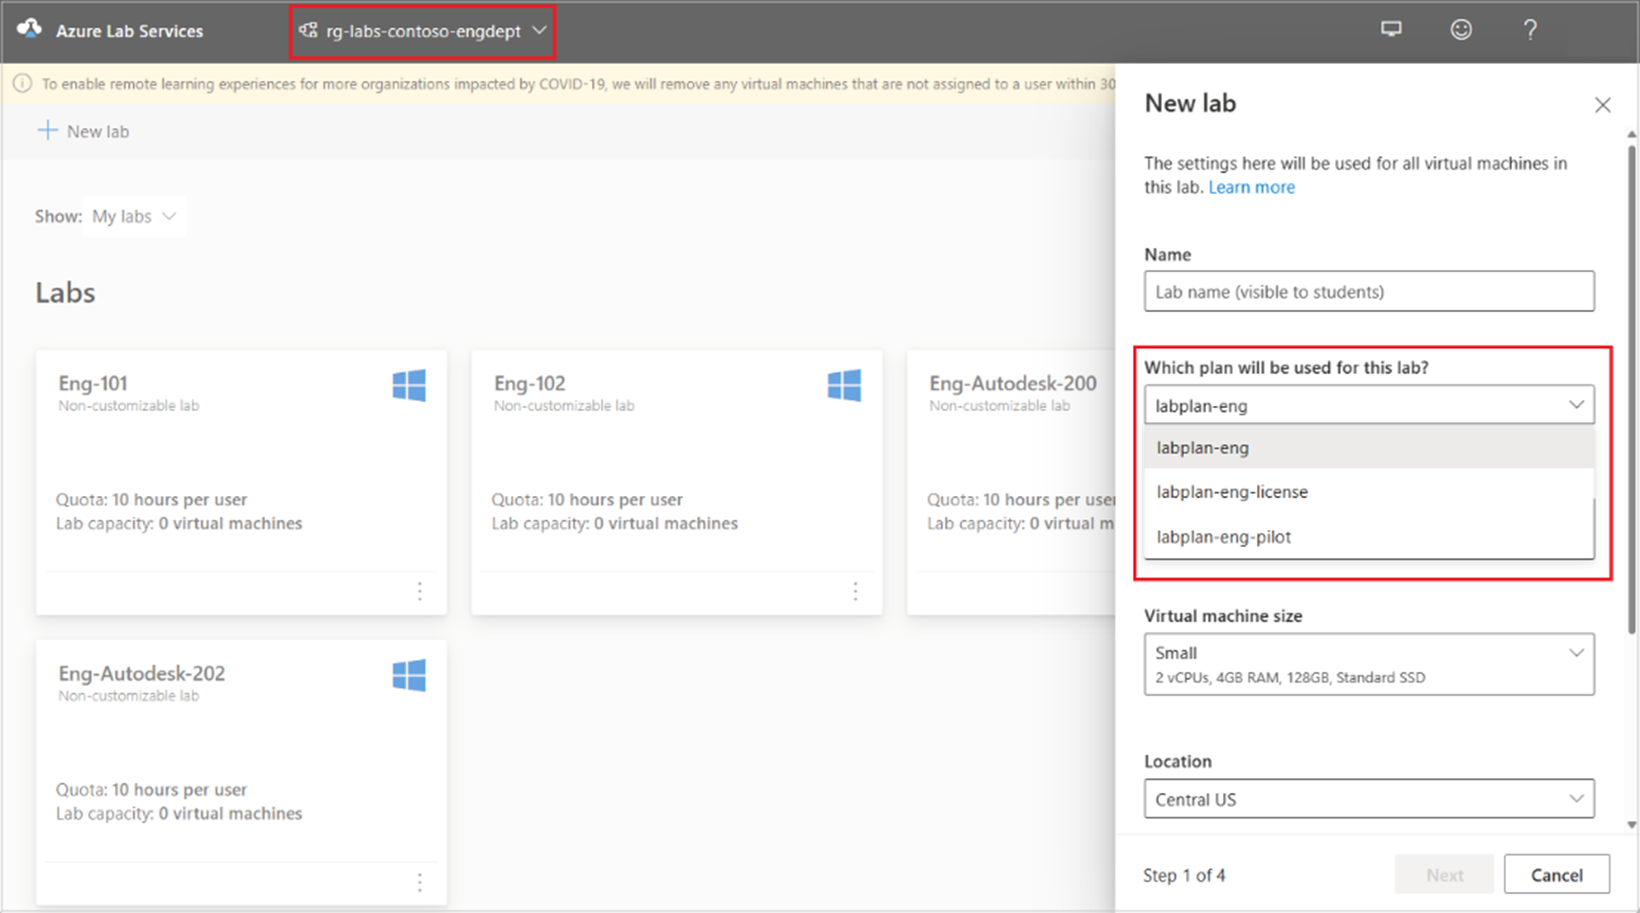 Screenshot that shows how to choose between lab plans when creating a lab in the Azure Lab Services website.